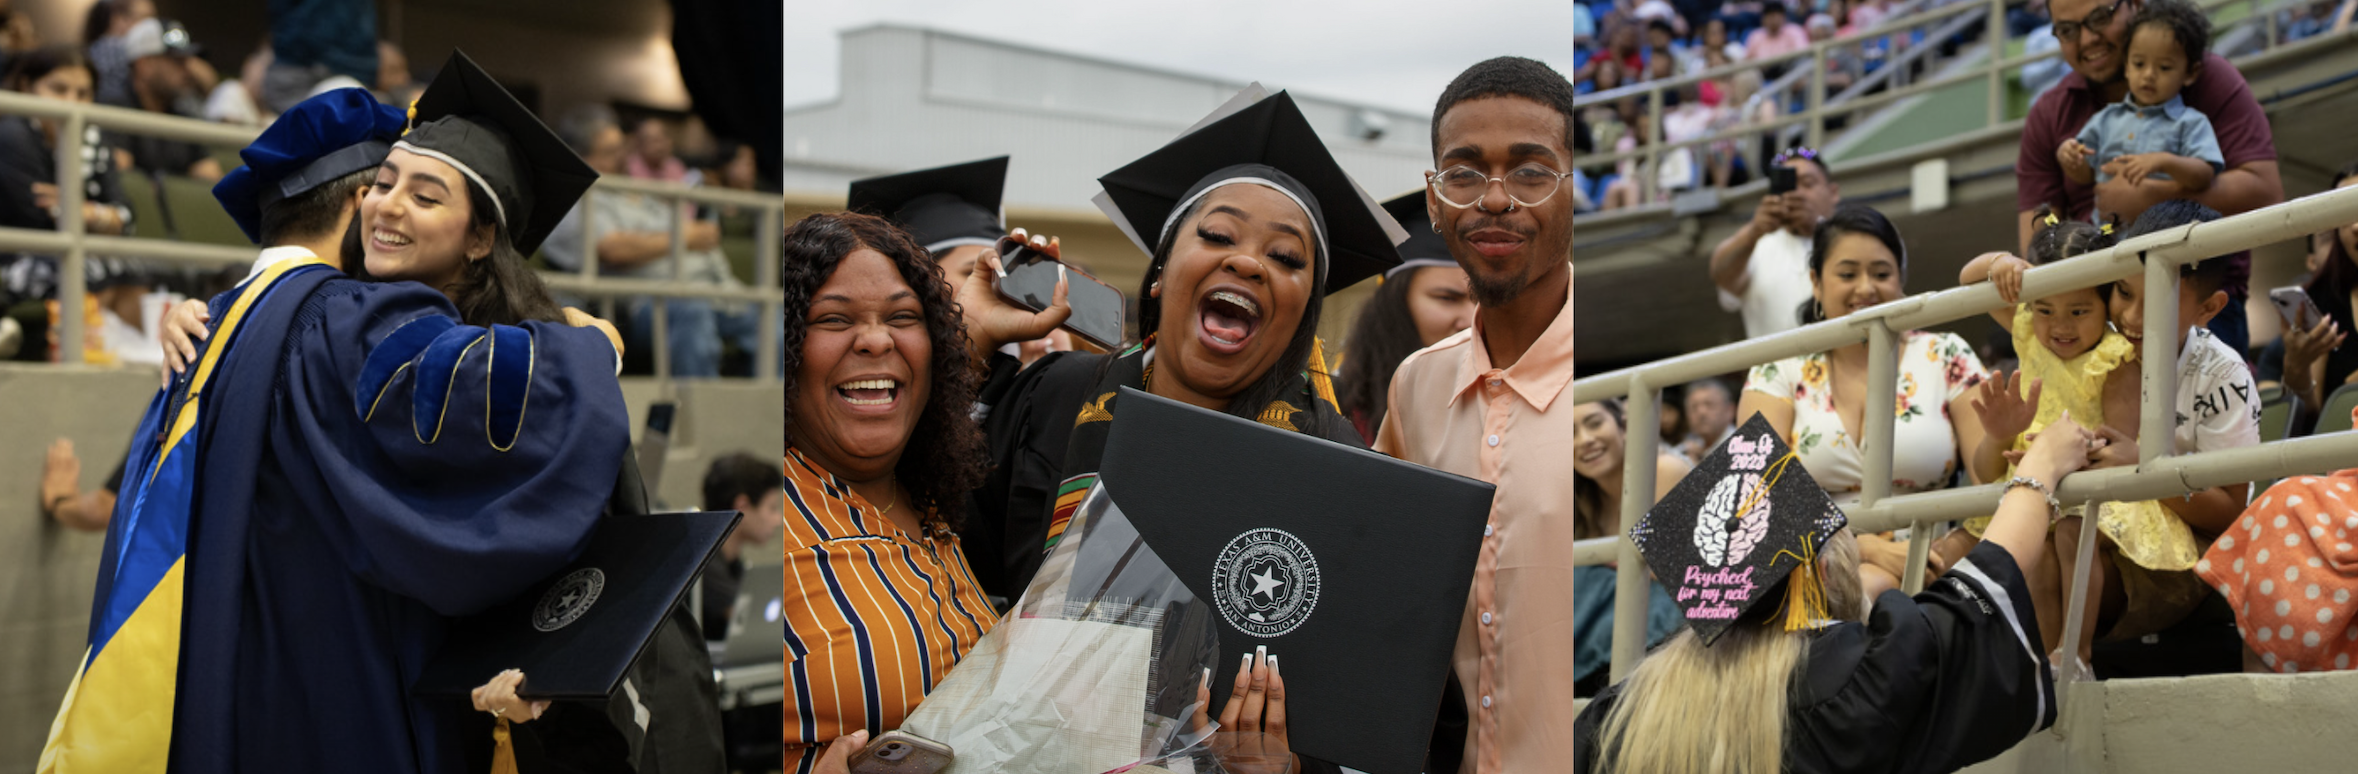 Graduates embrace, pose and celebrate with others.